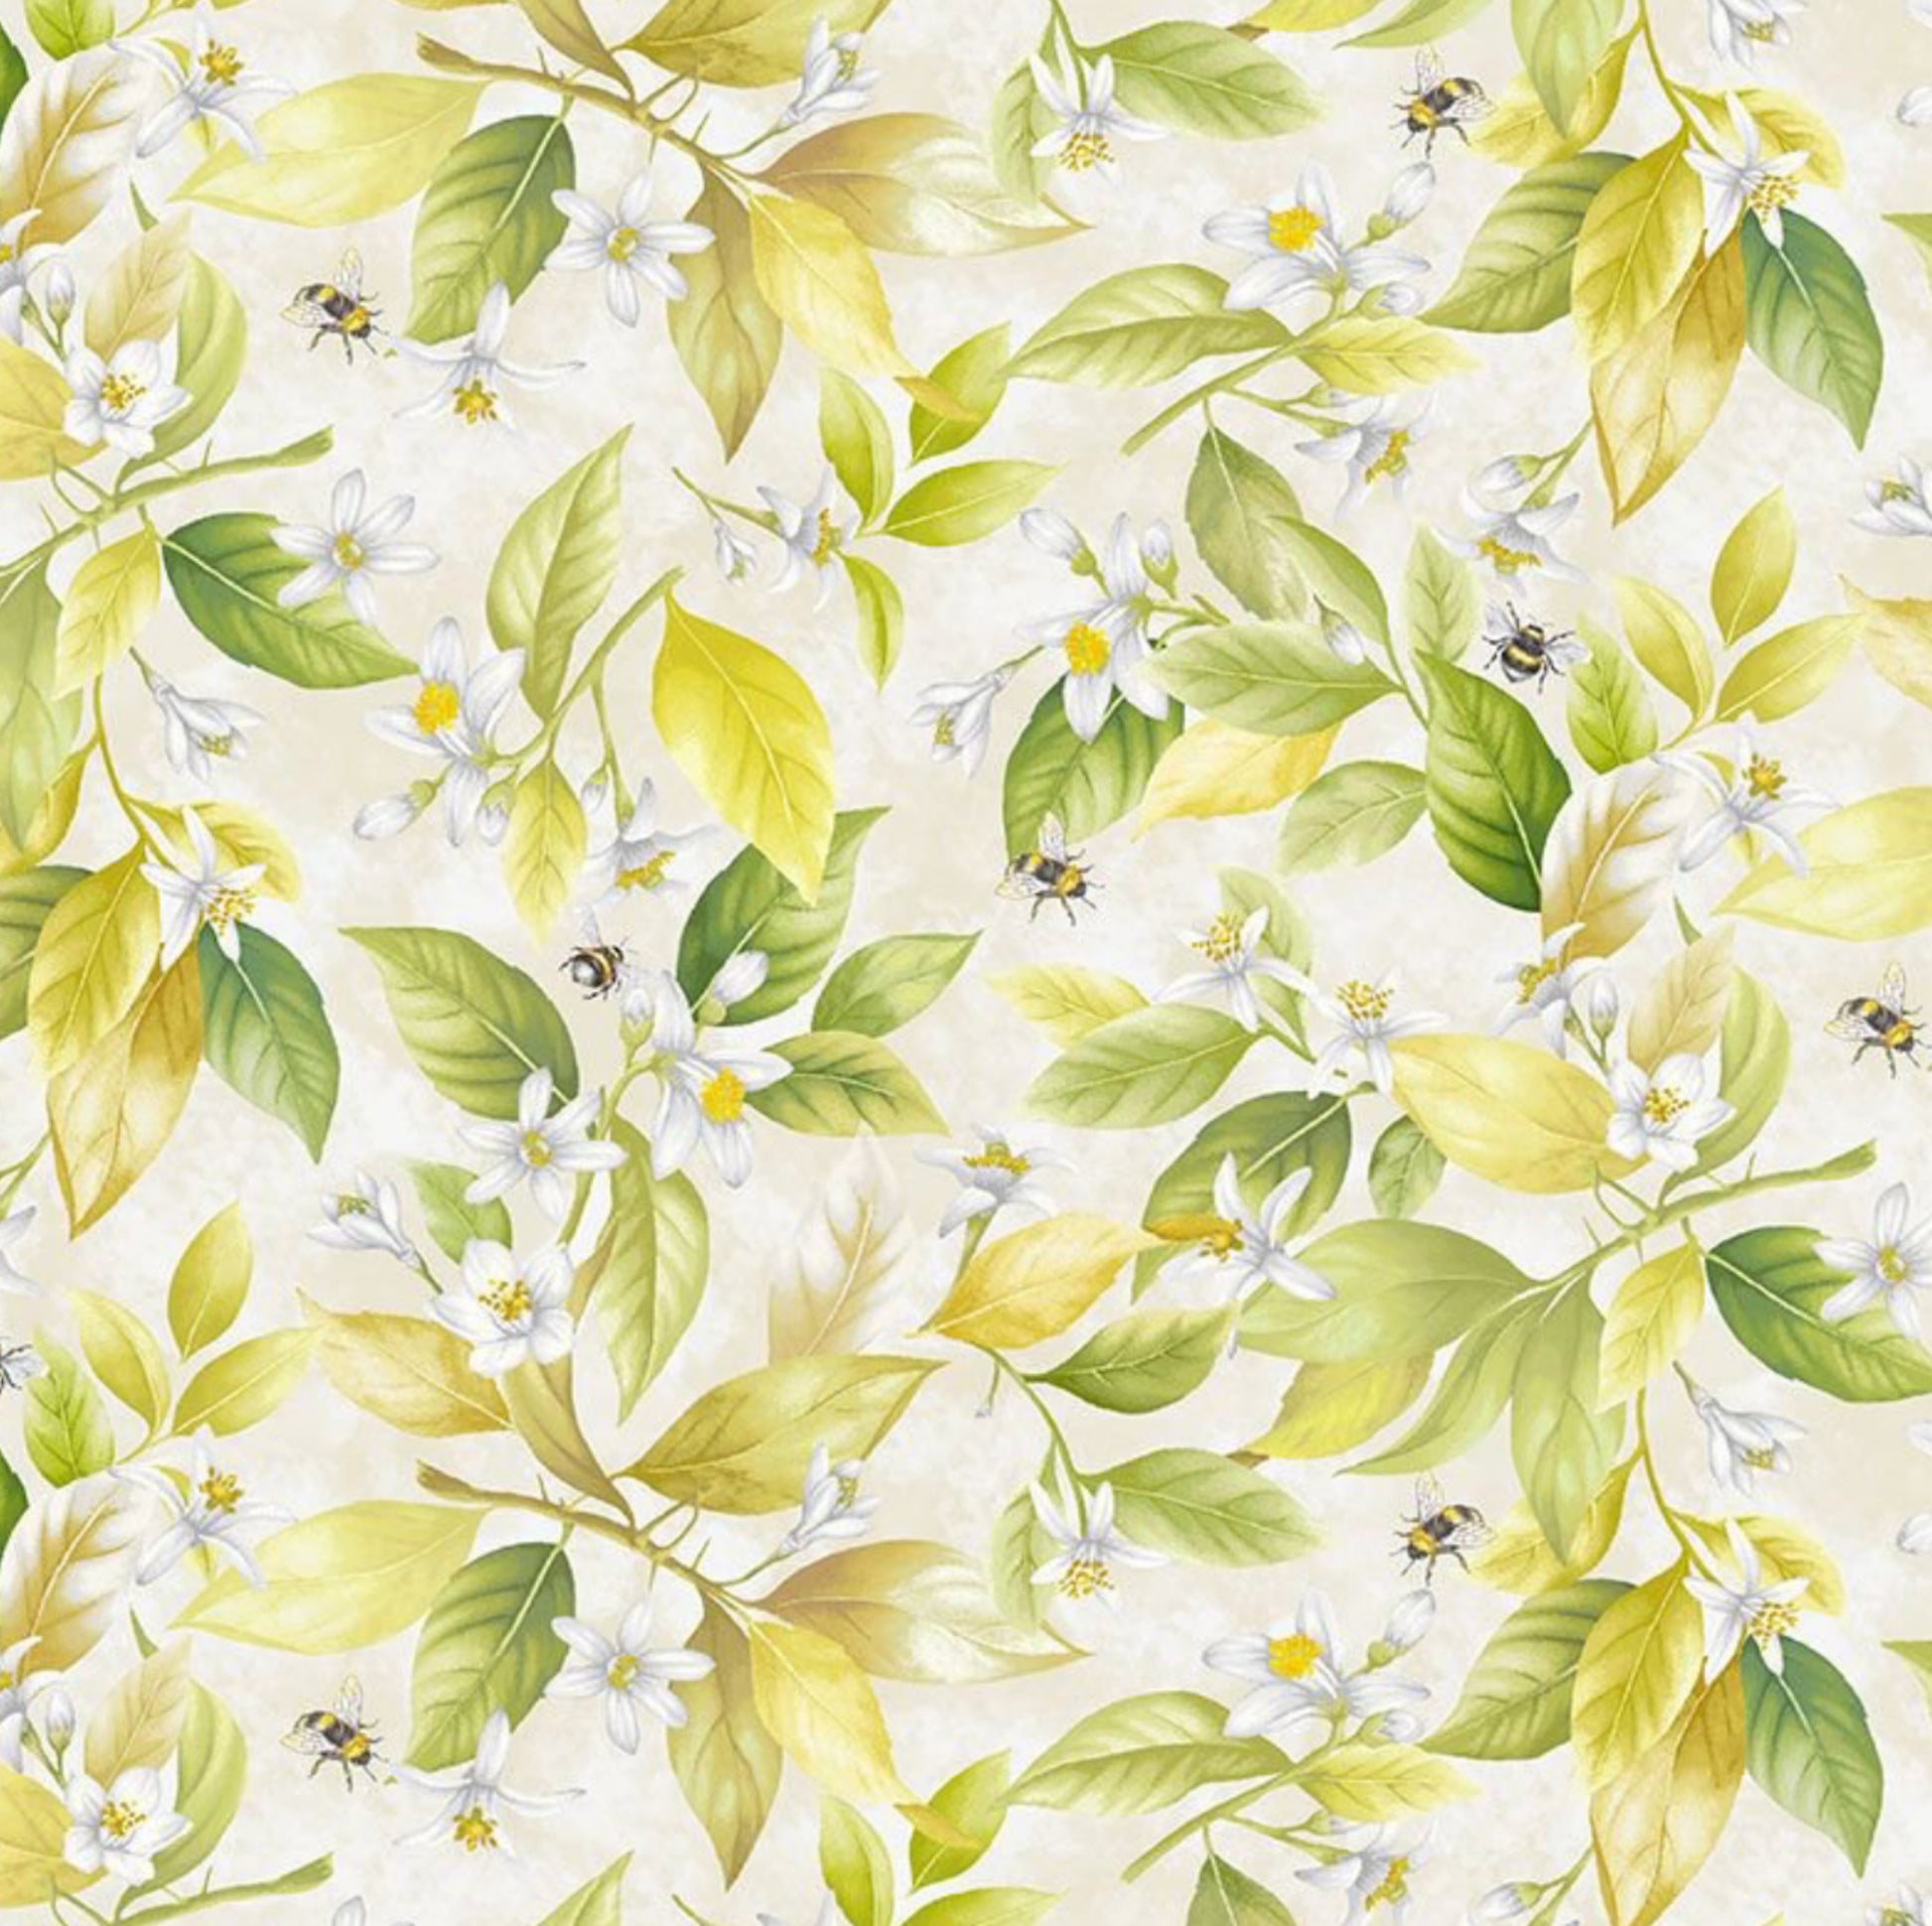 Lemon Blossoms & Bees Fabric from the Lemon Bouquet Collection from Timeless Treasures